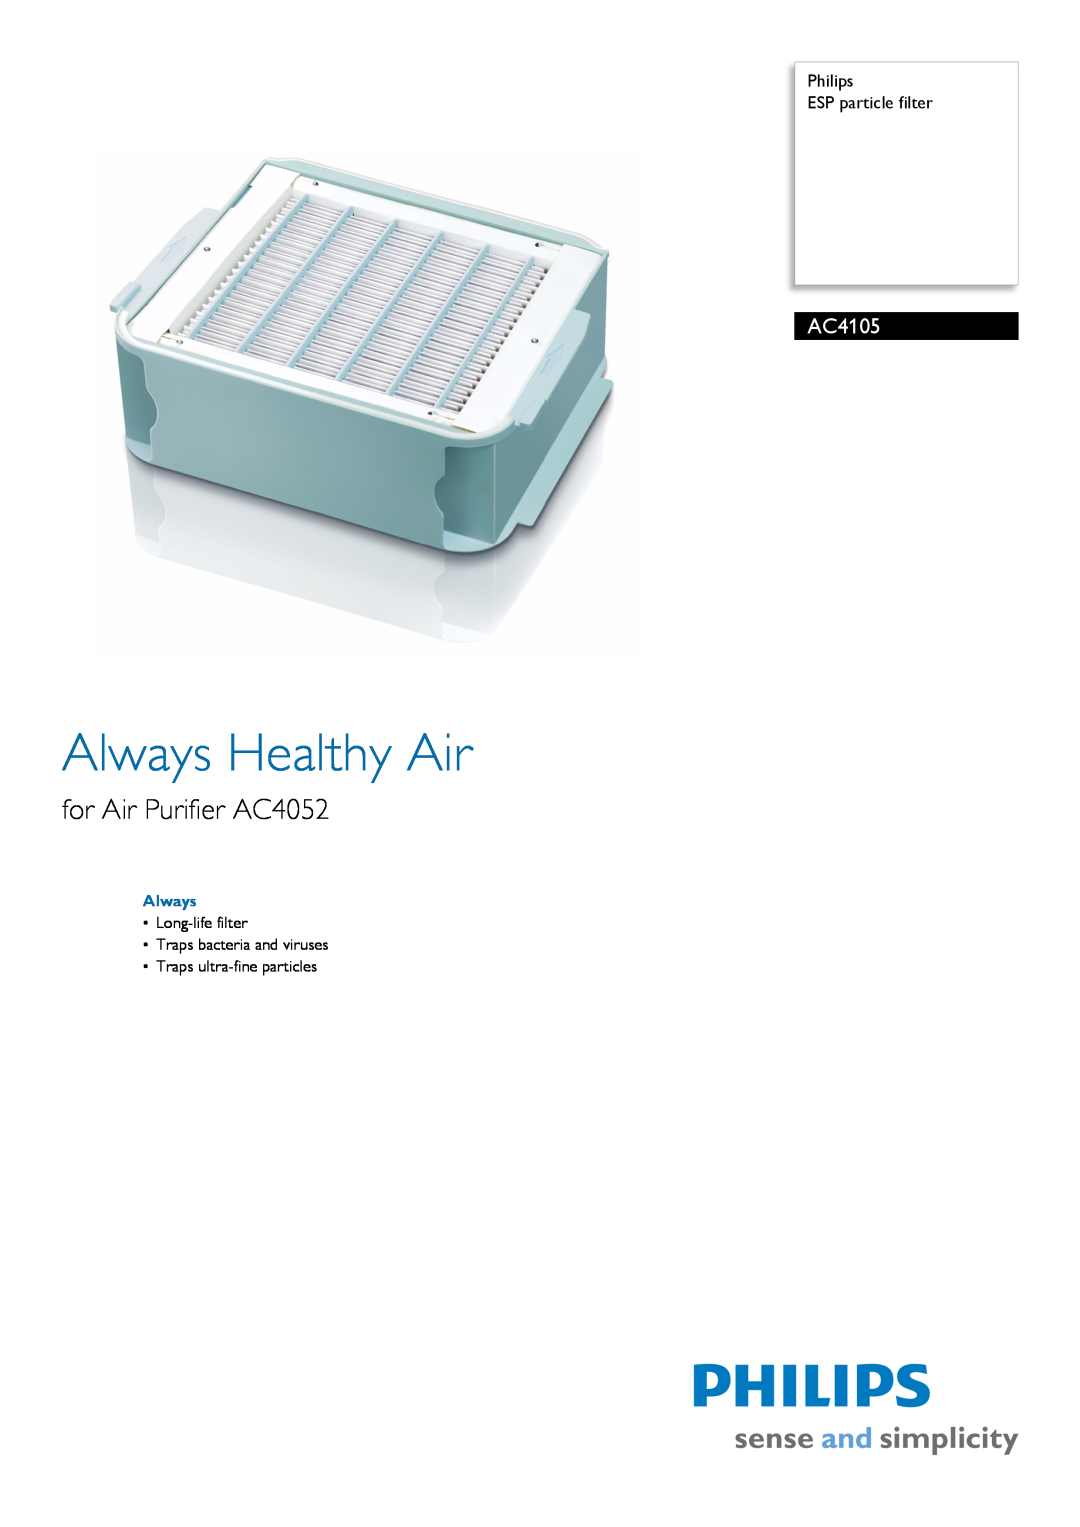 Philips AC4105/00 manual Philips ESP particle filter, Always Healthy Air, for Air Purifier AC4052 